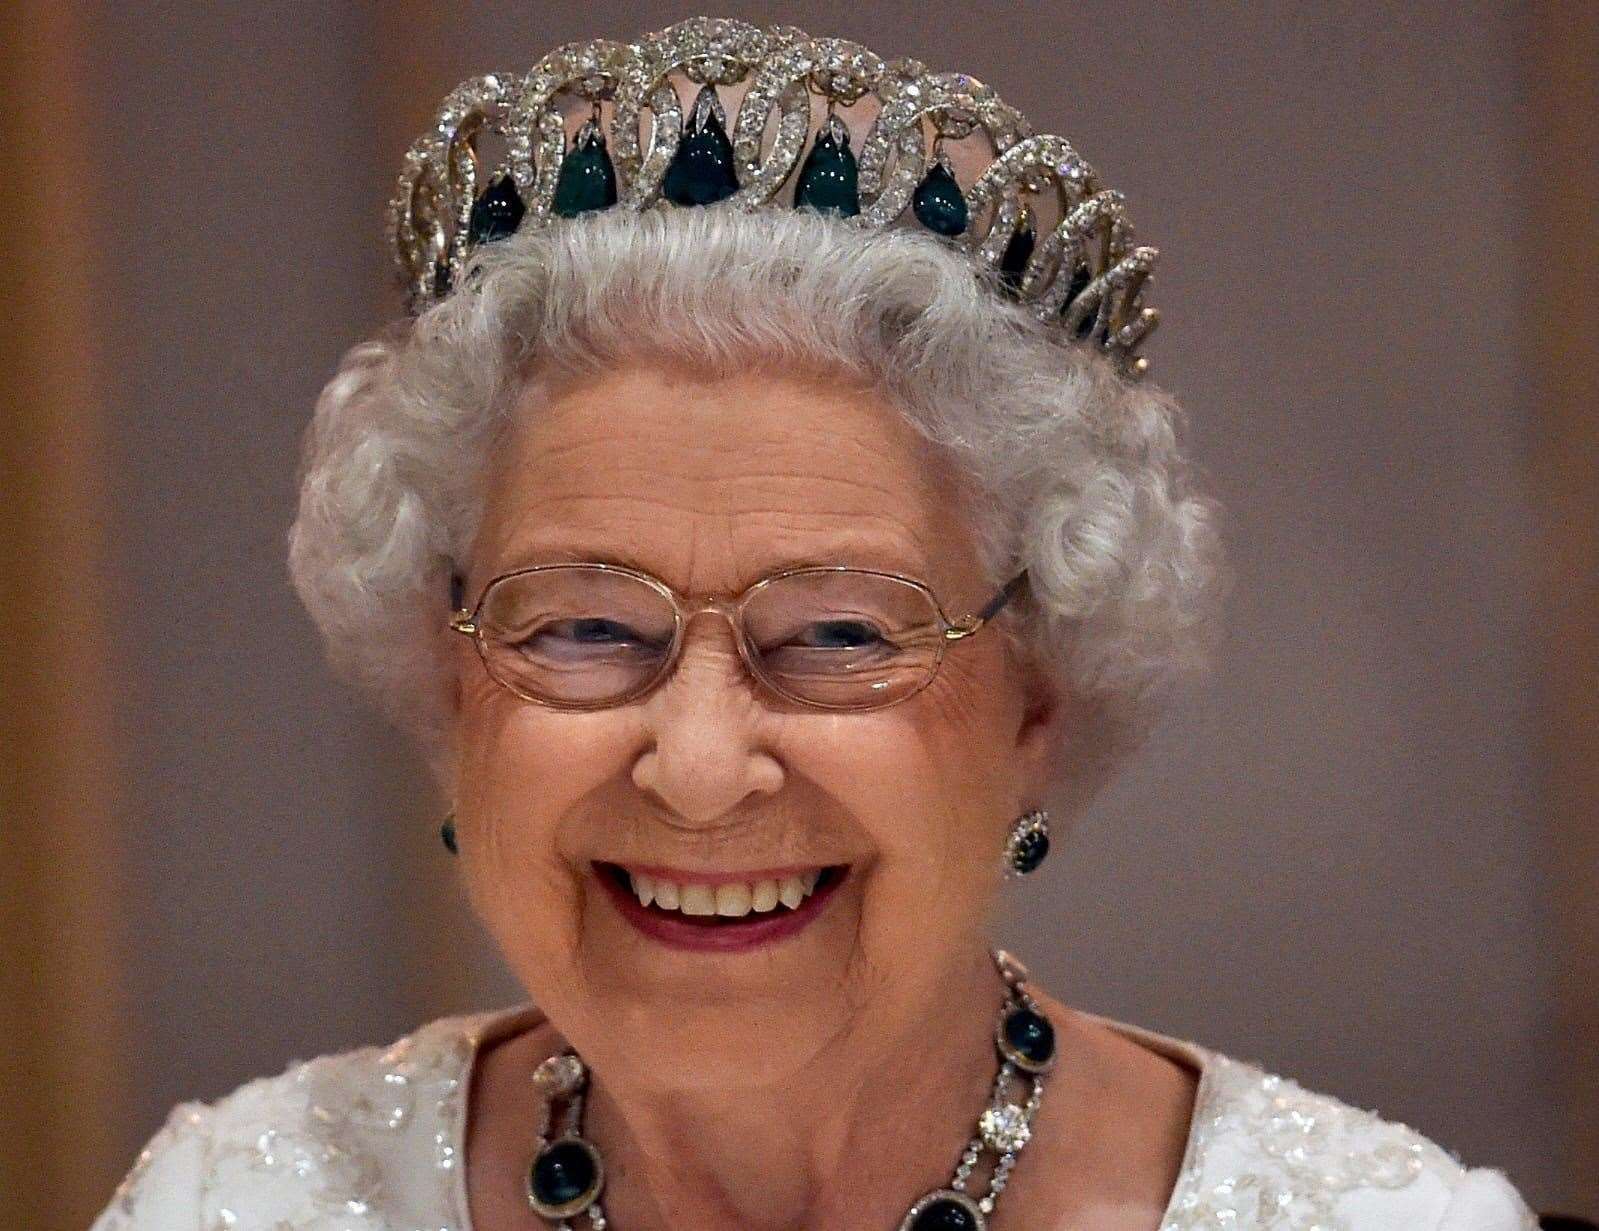 Her Majesty the Queen is celebrating 70 years on the throne